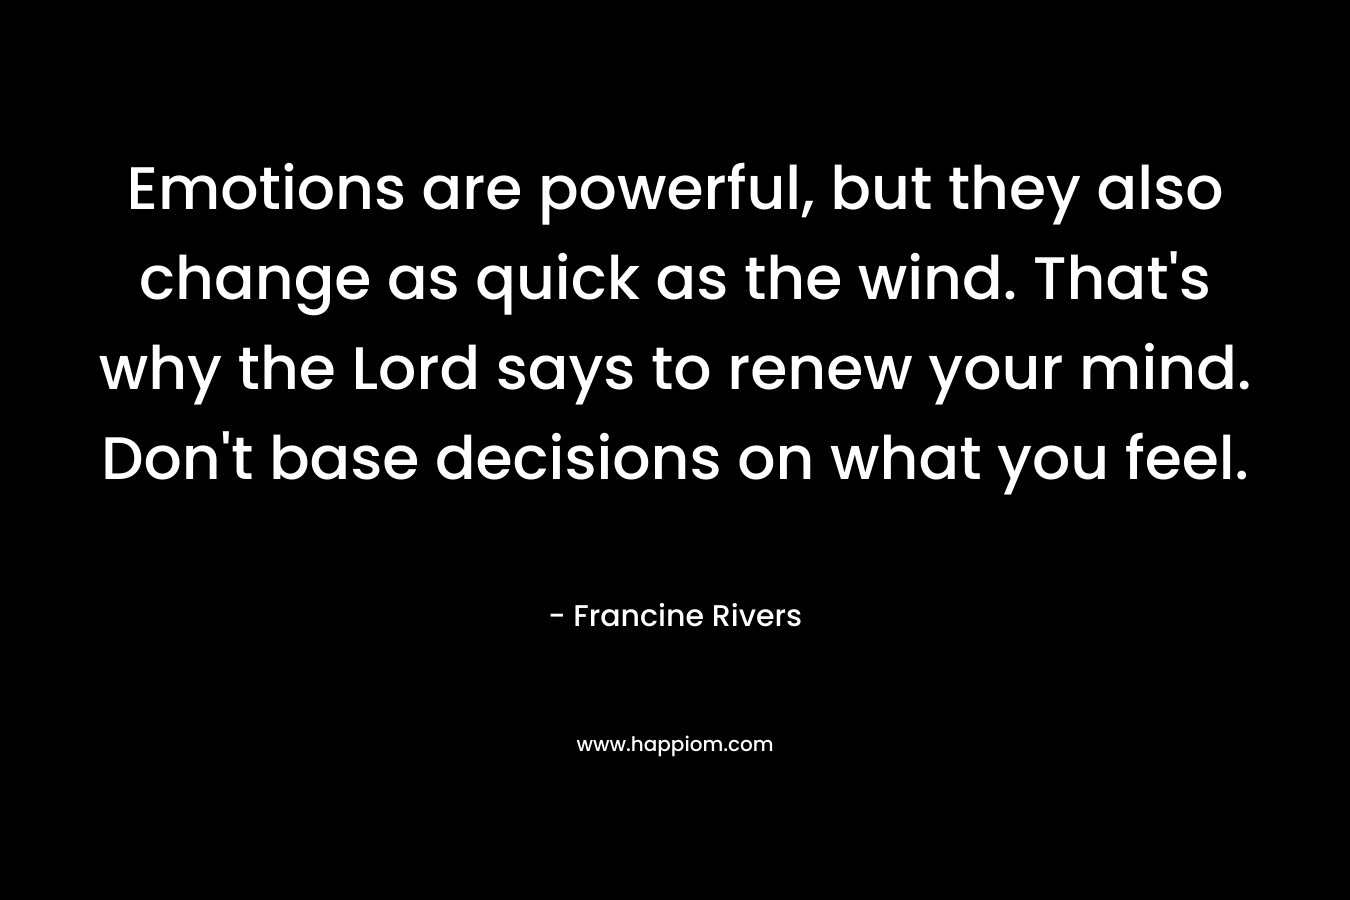 Emotions are powerful, but they also change as quick as the wind. That’s why the Lord says to renew your mind. Don’t base decisions on what you feel. – Francine Rivers